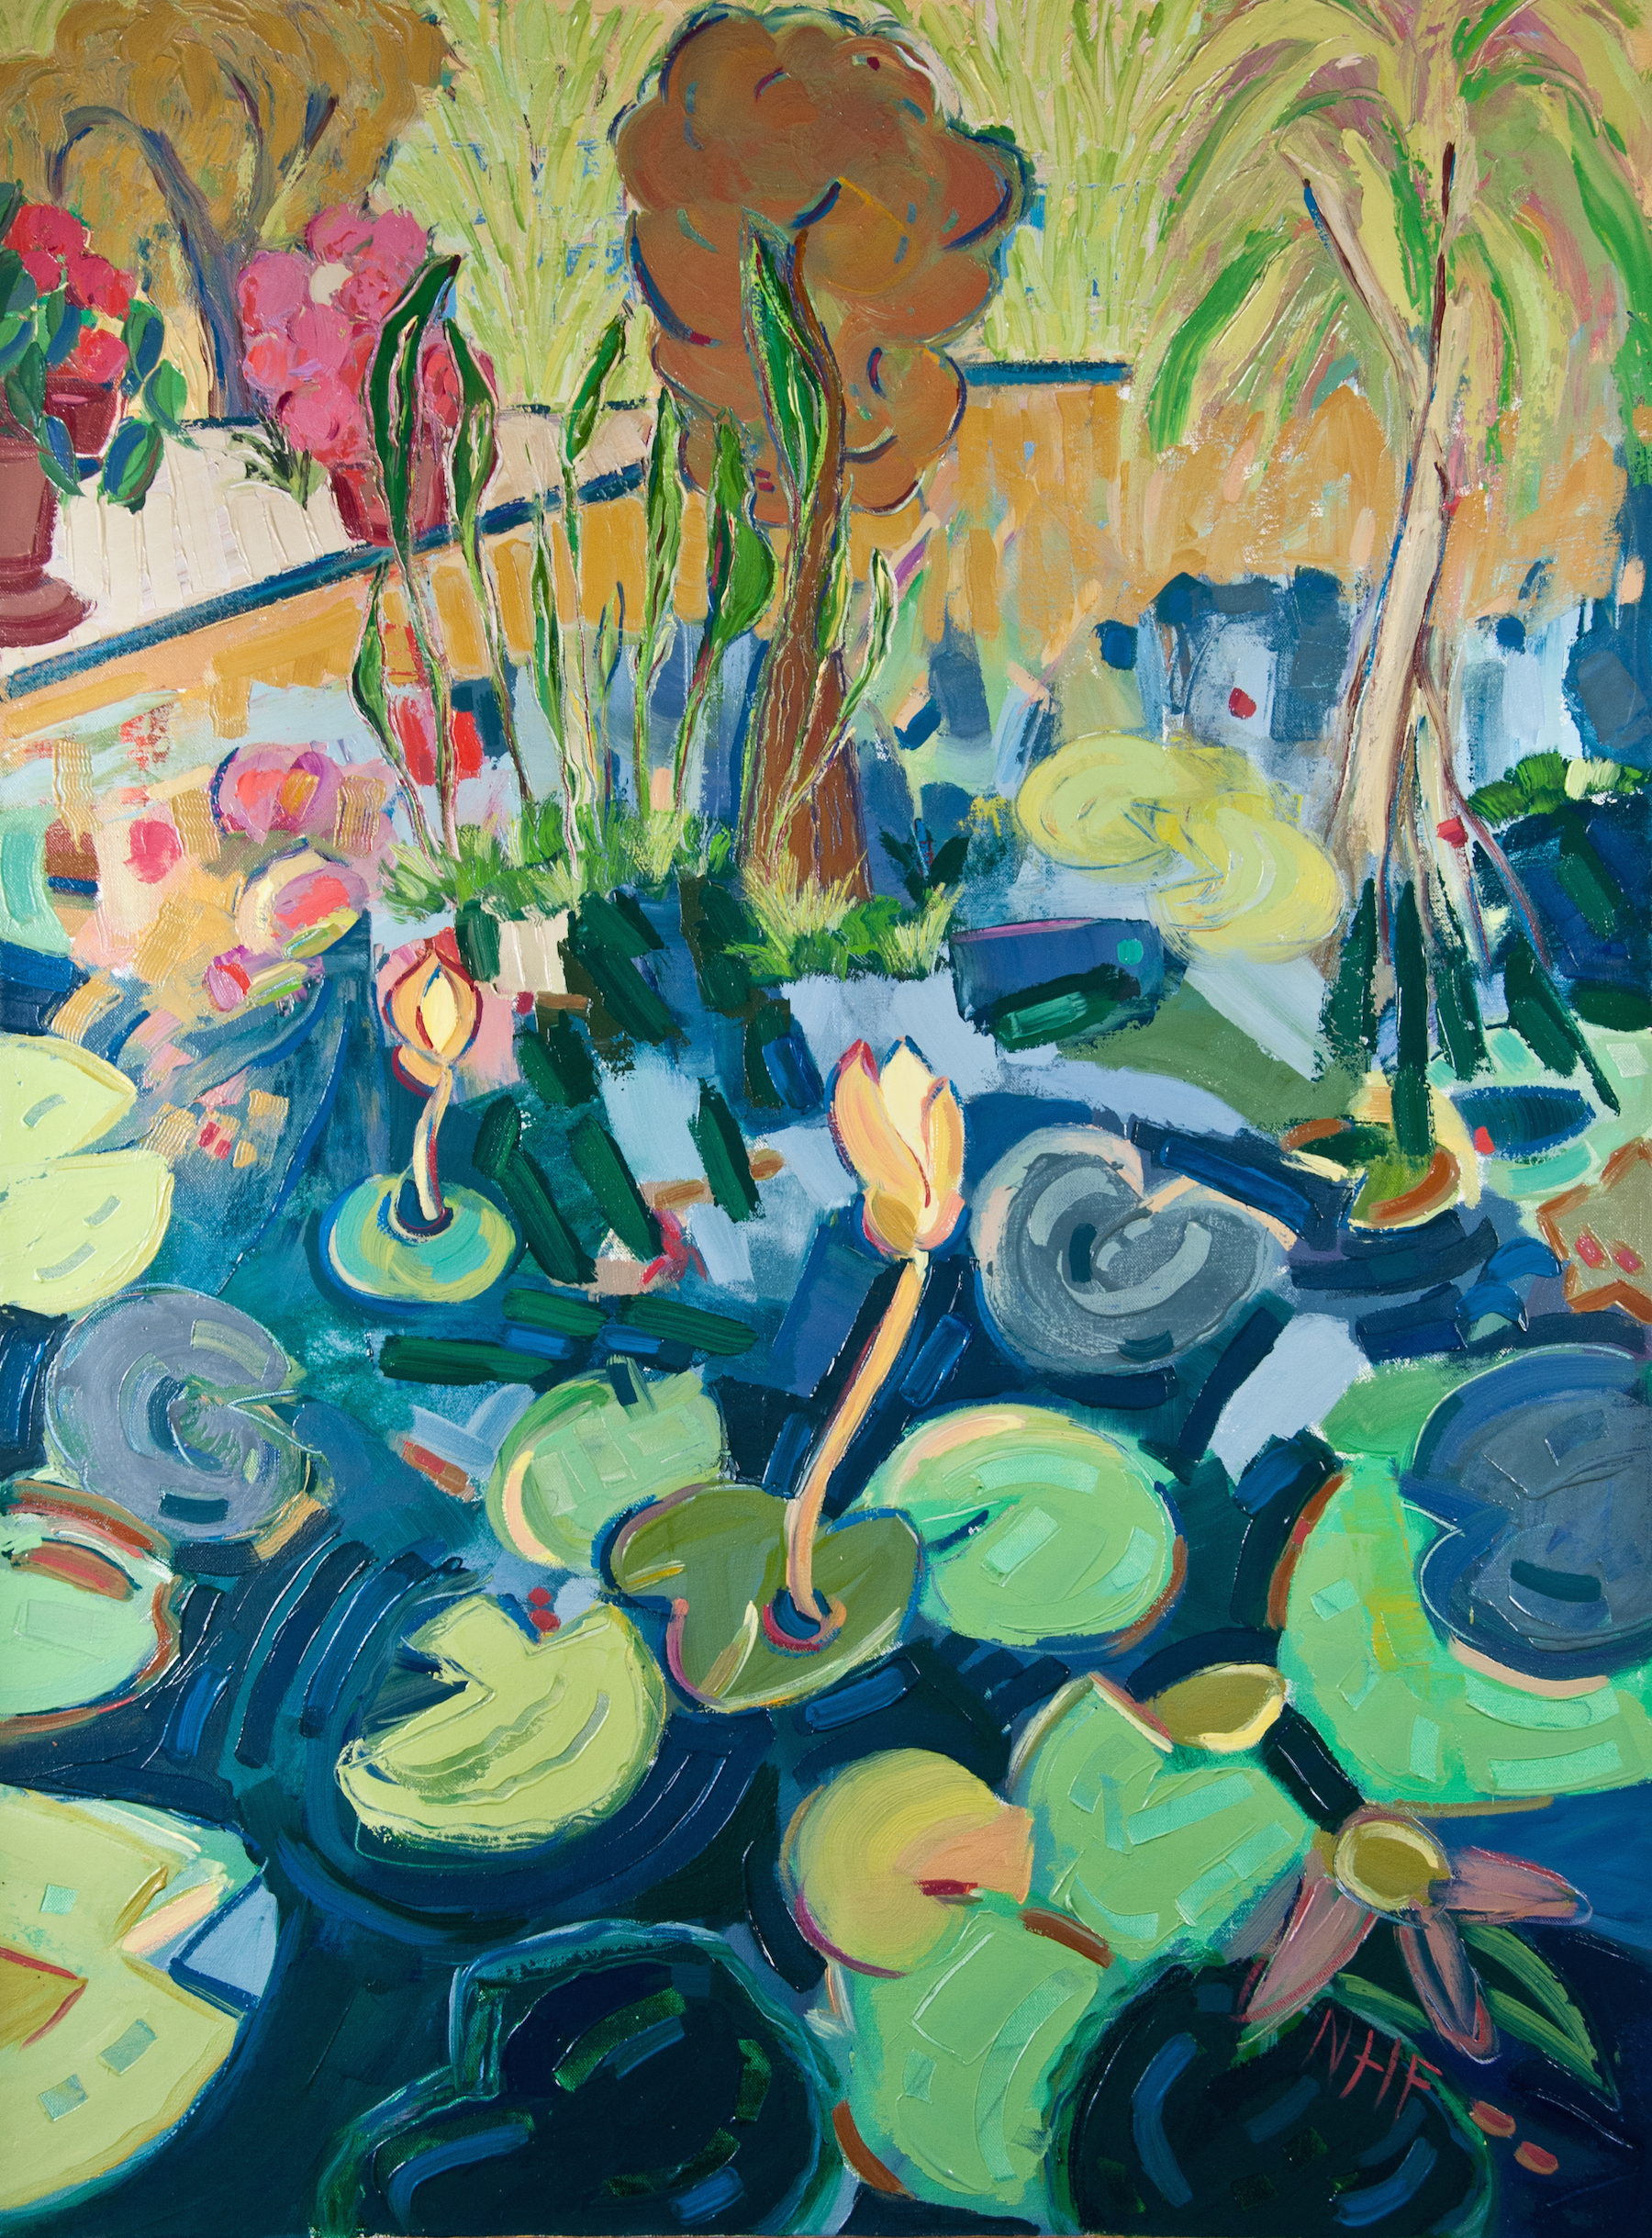   Water Lilies in the Botanical Gardens , oil on canvas, 40x30 